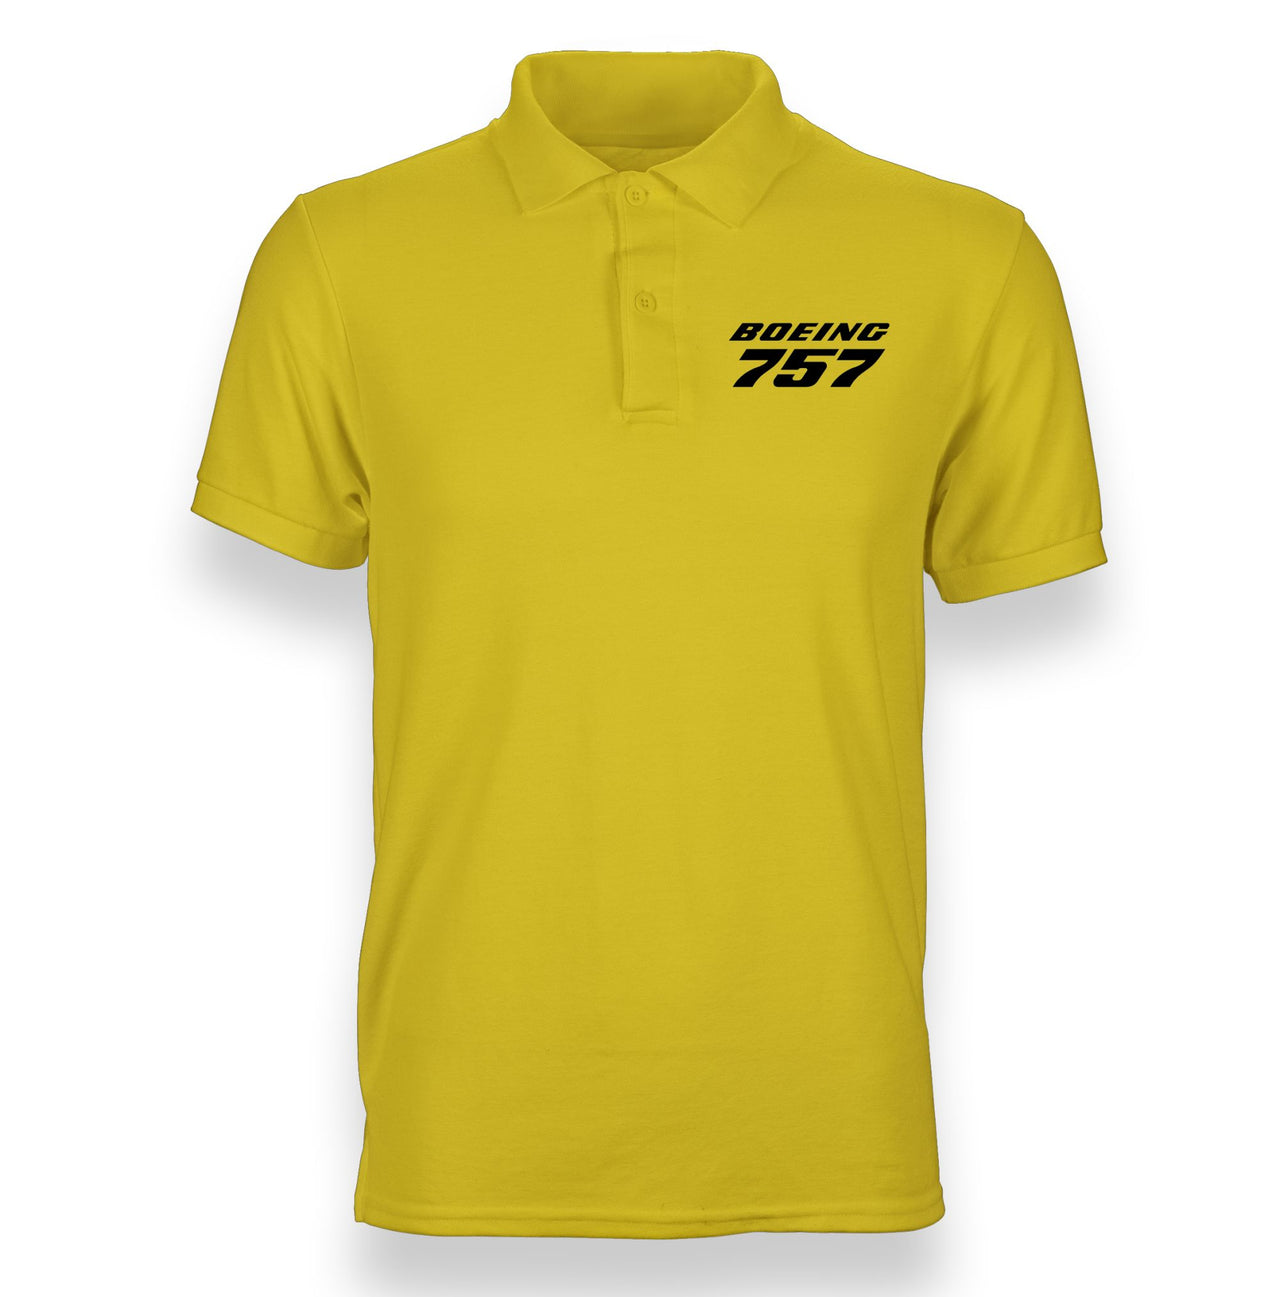 Boeing 757 & Text Designed "WOMEN" Polo T-Shirts